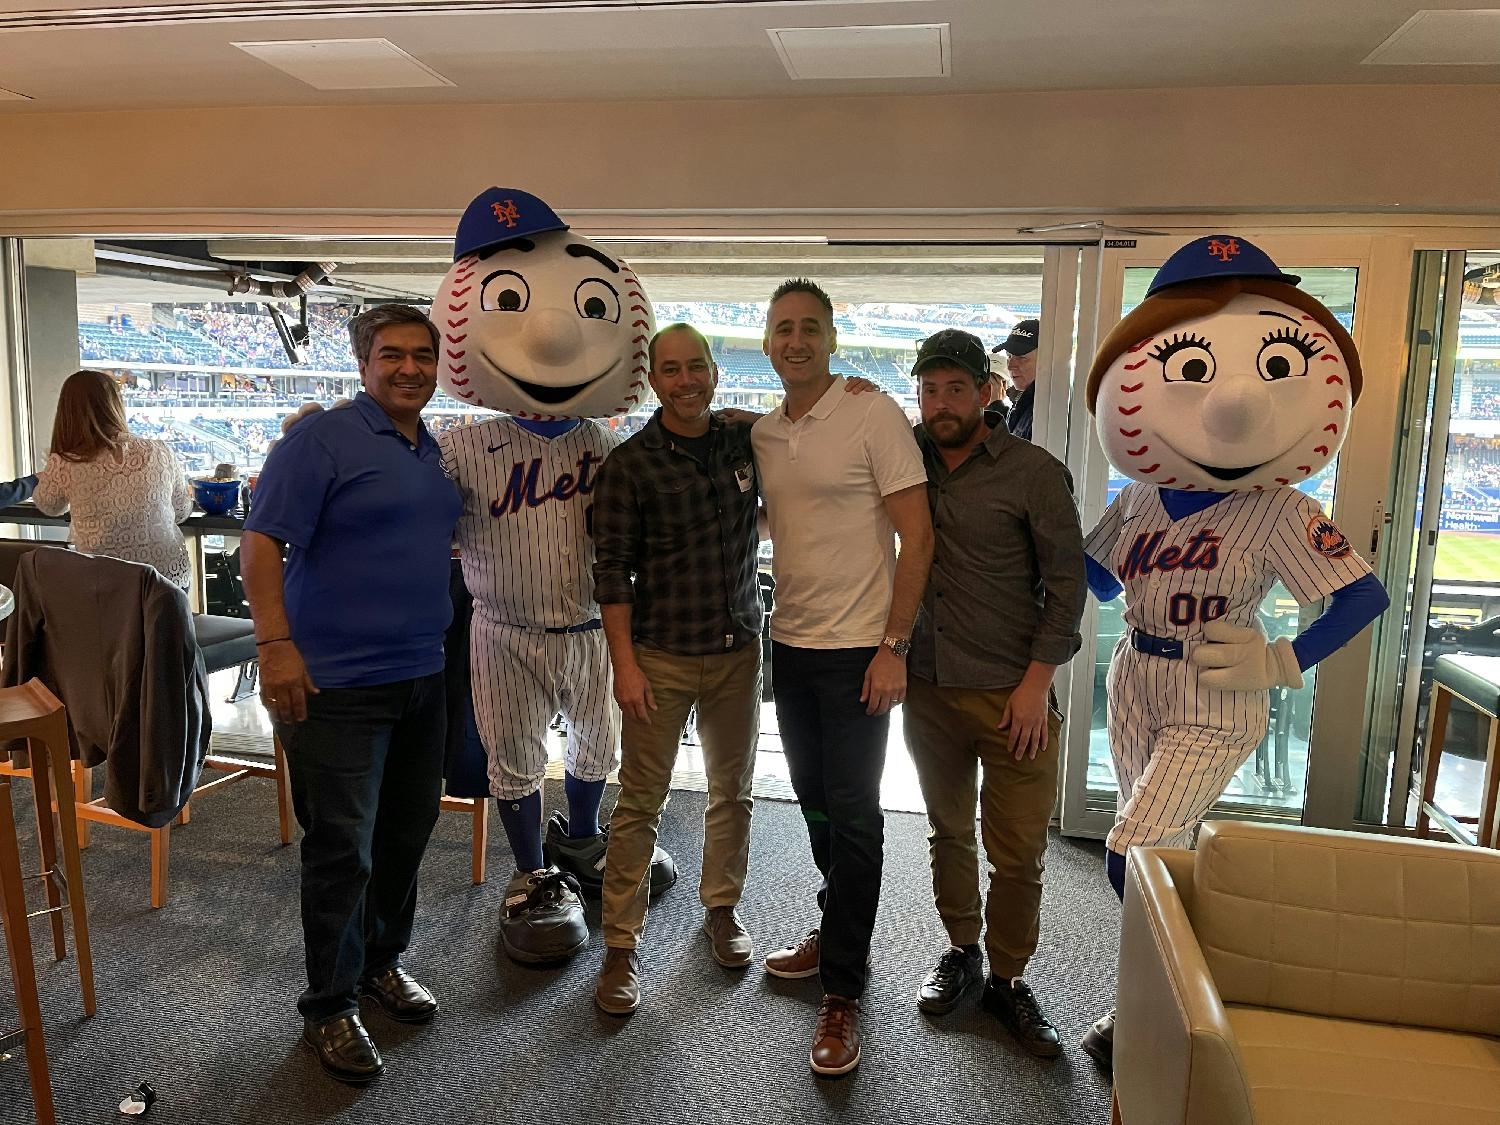 Hanging out talking sports technology with the NY Mets